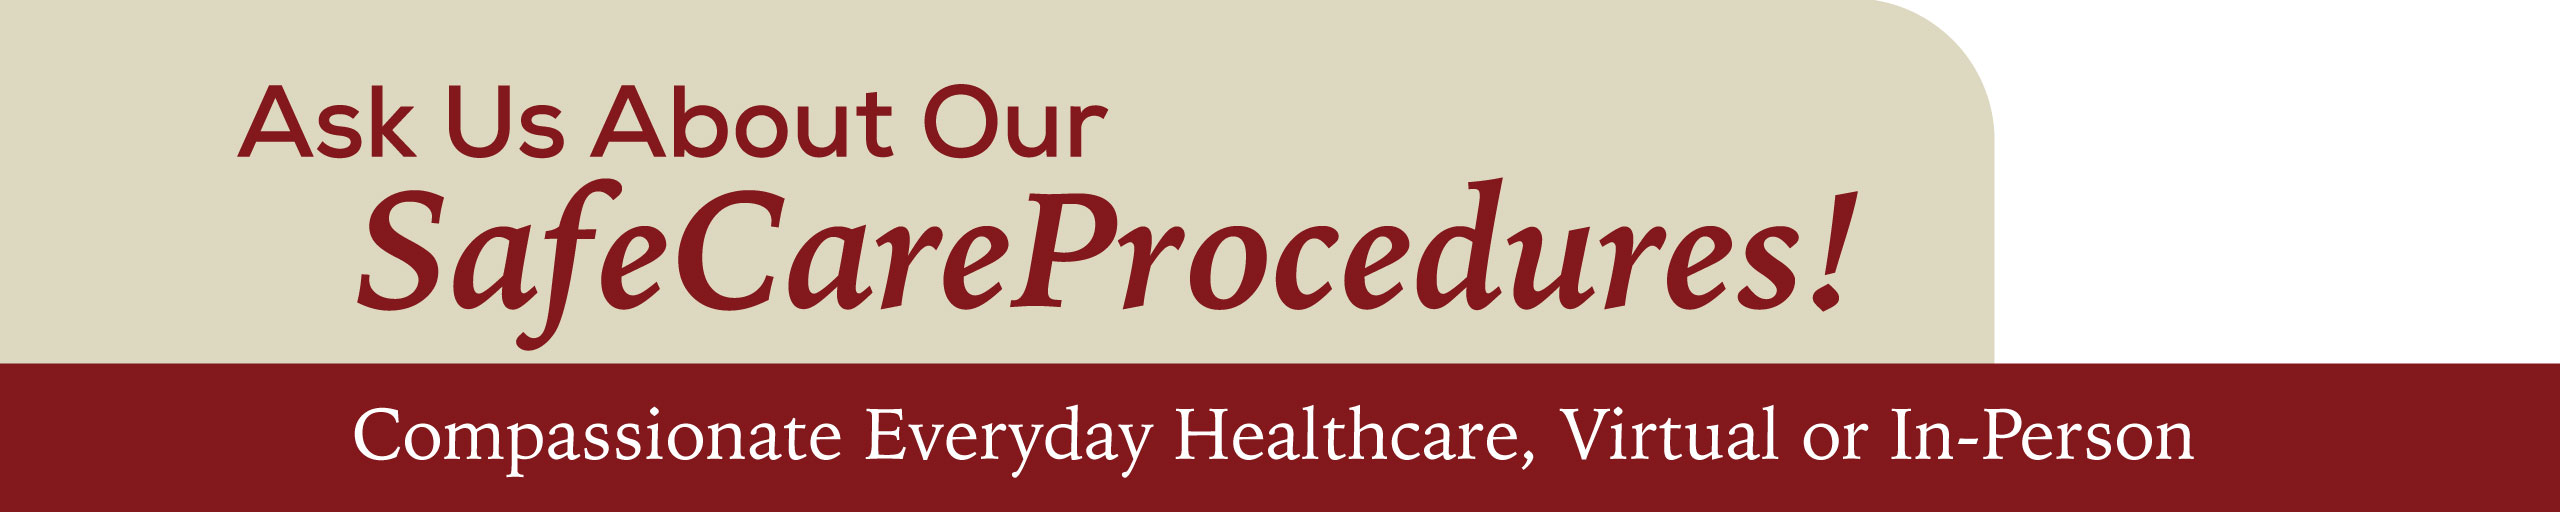 Ask Us About Our SafeCareProcedures